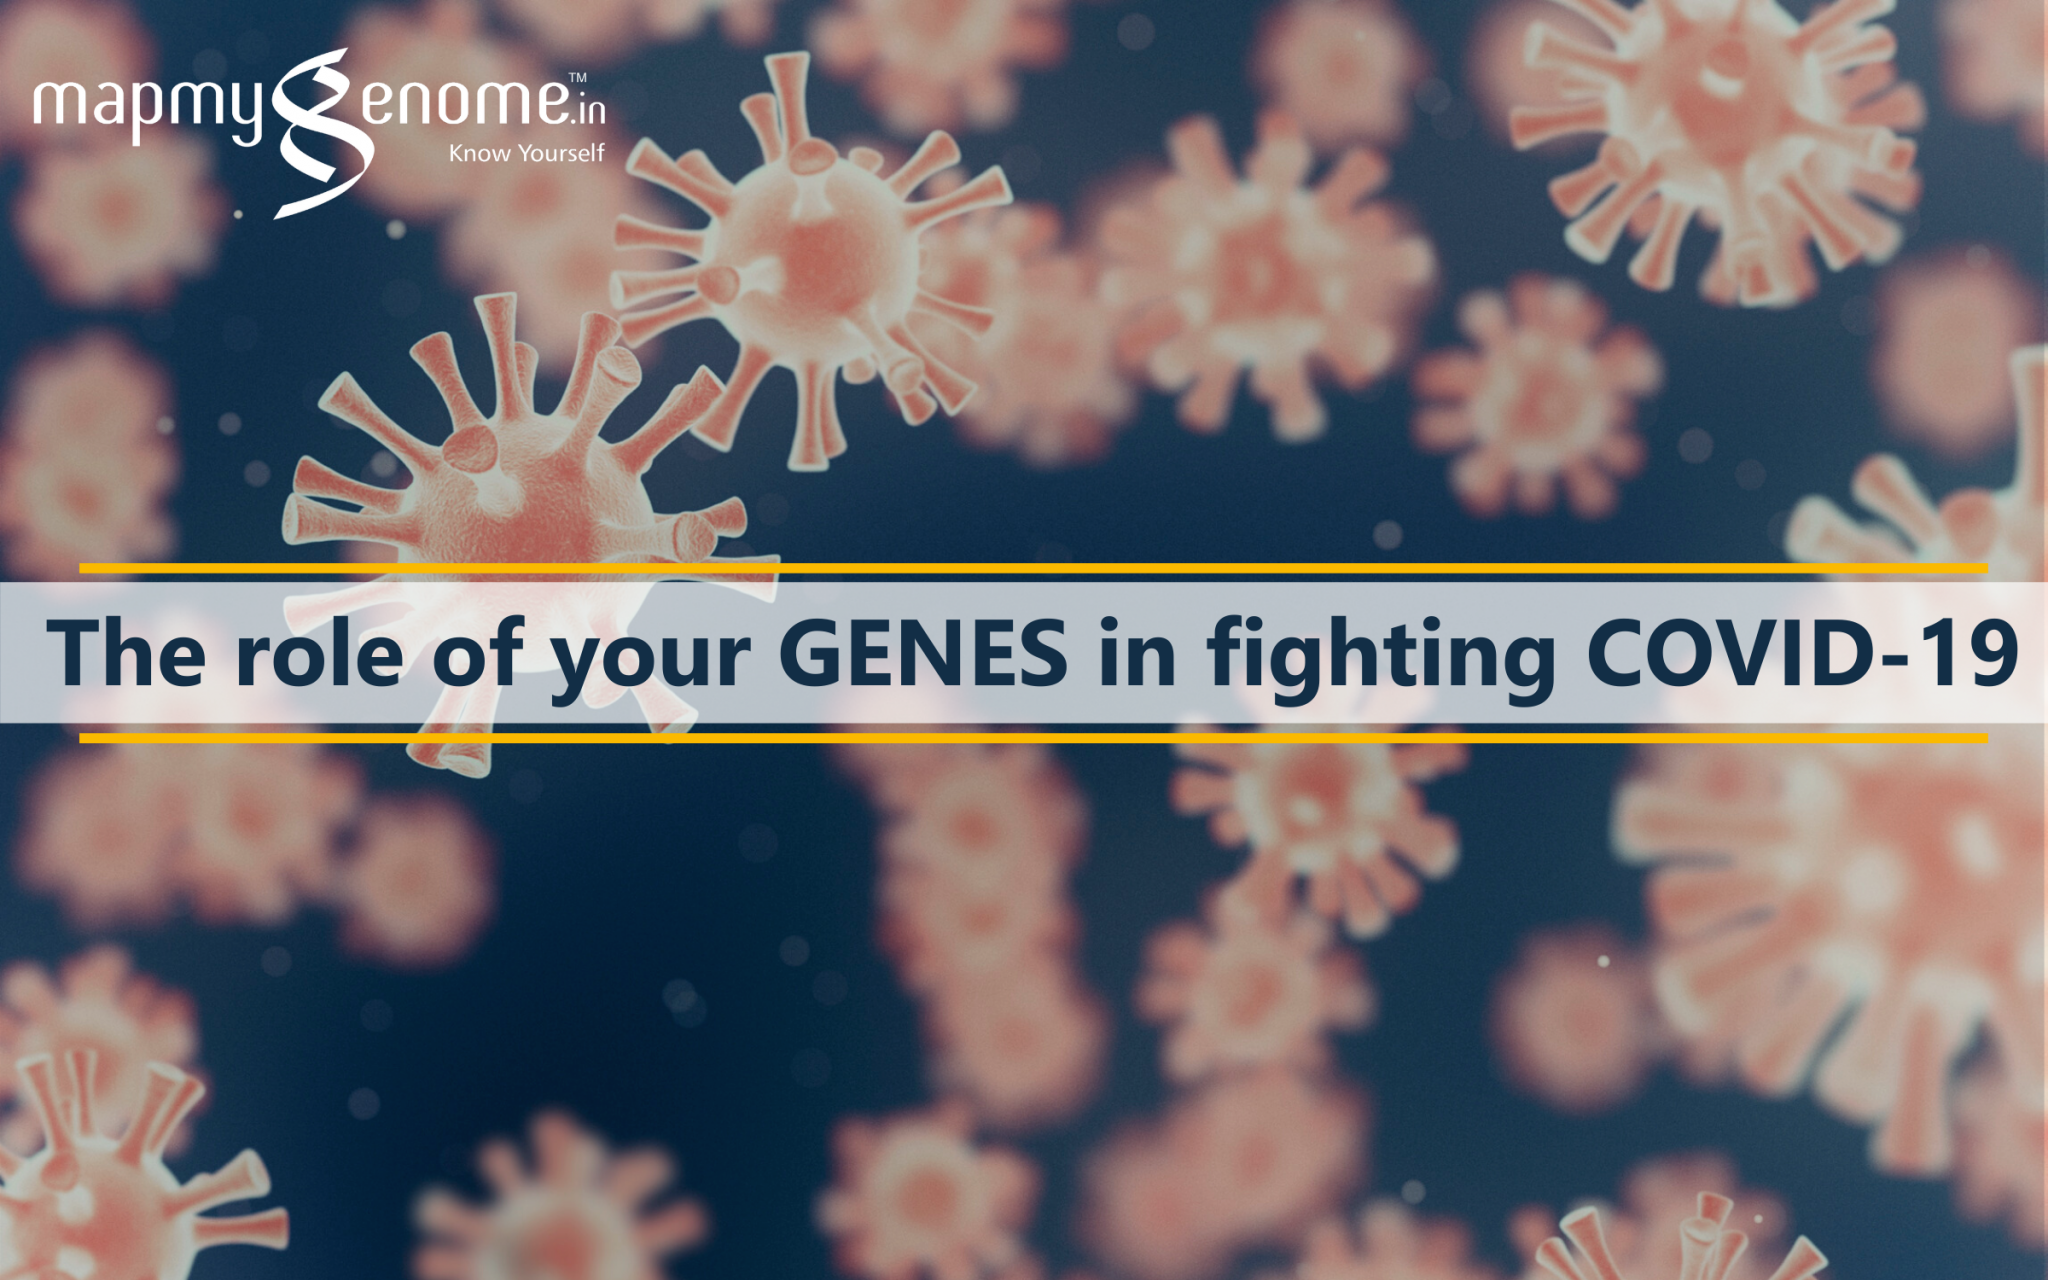 The role of your GENES in fighting COVID-19